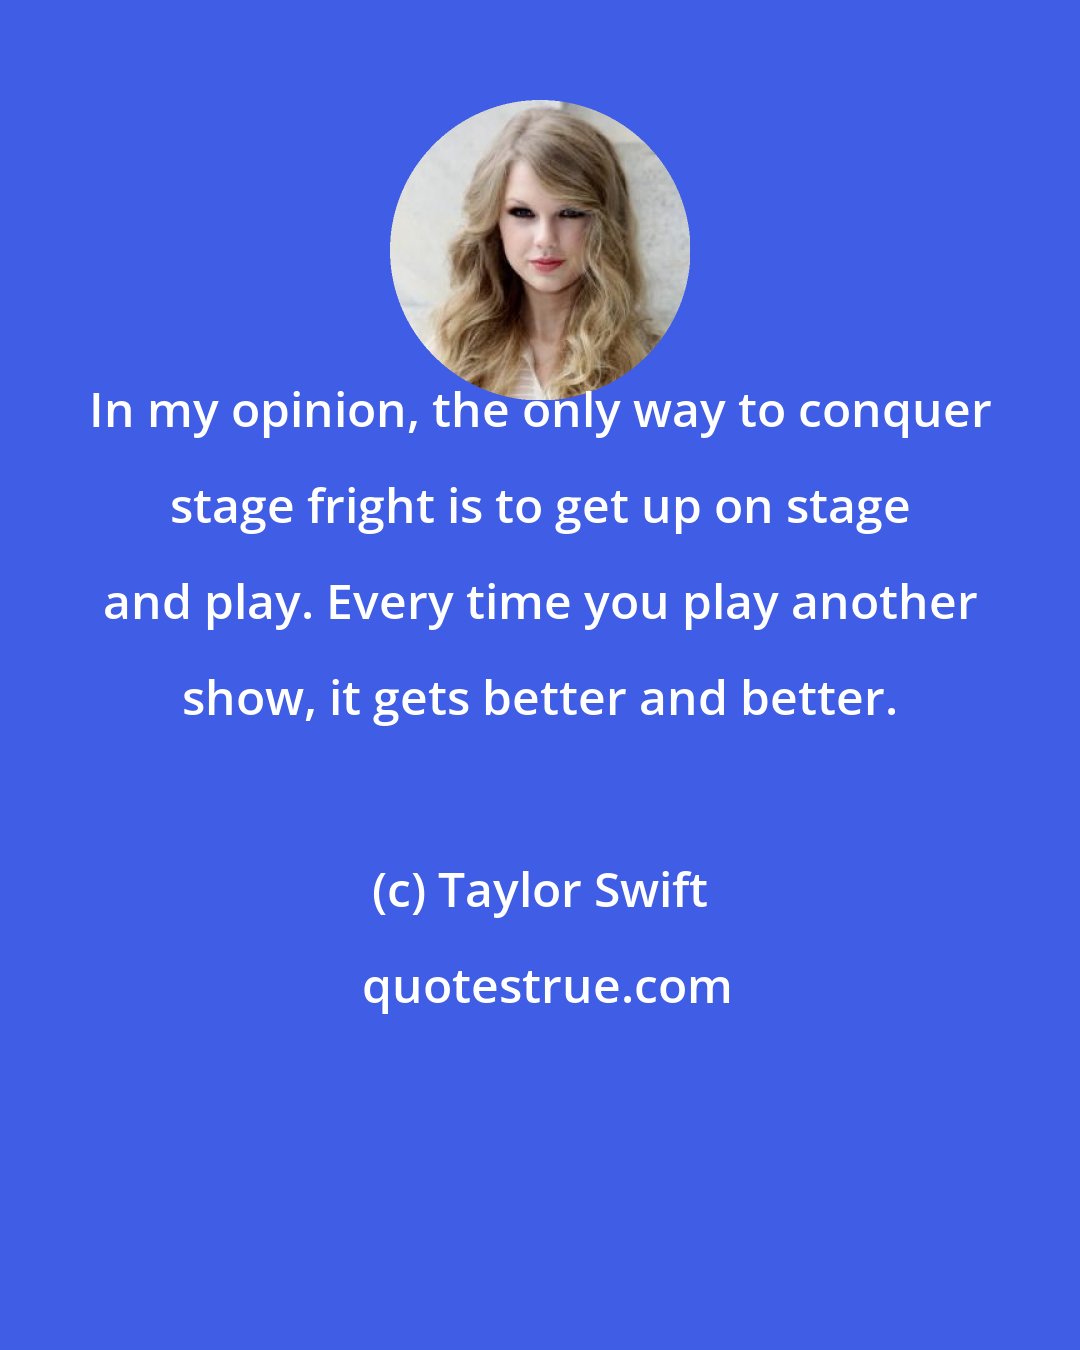 Taylor Swift: In my opinion, the only way to conquer stage fright is to get up on stage and play. Every time you play another show, it gets better and better.